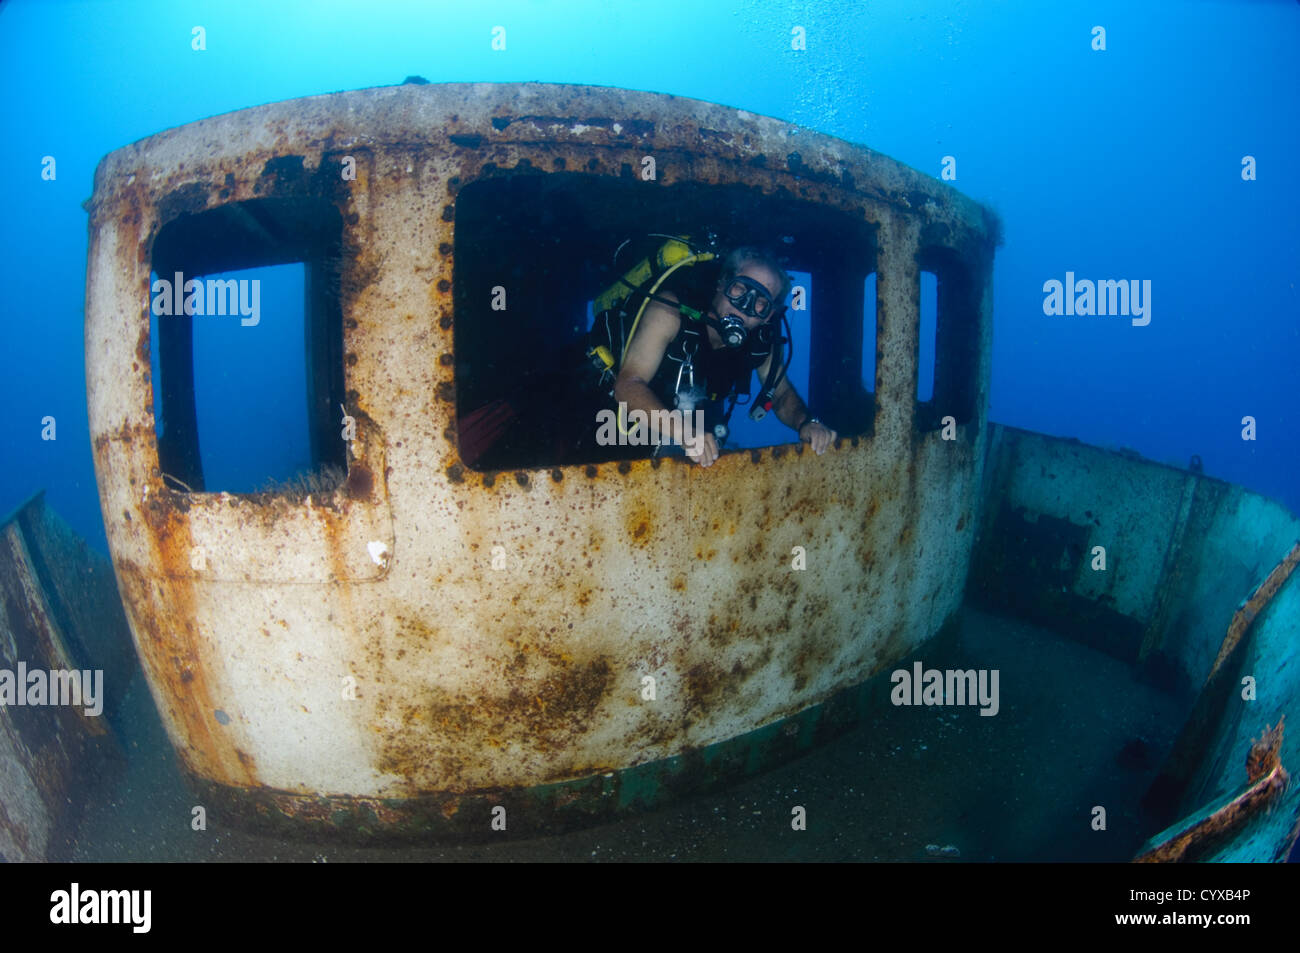 n artificial reef and a diving site. Stock Photo